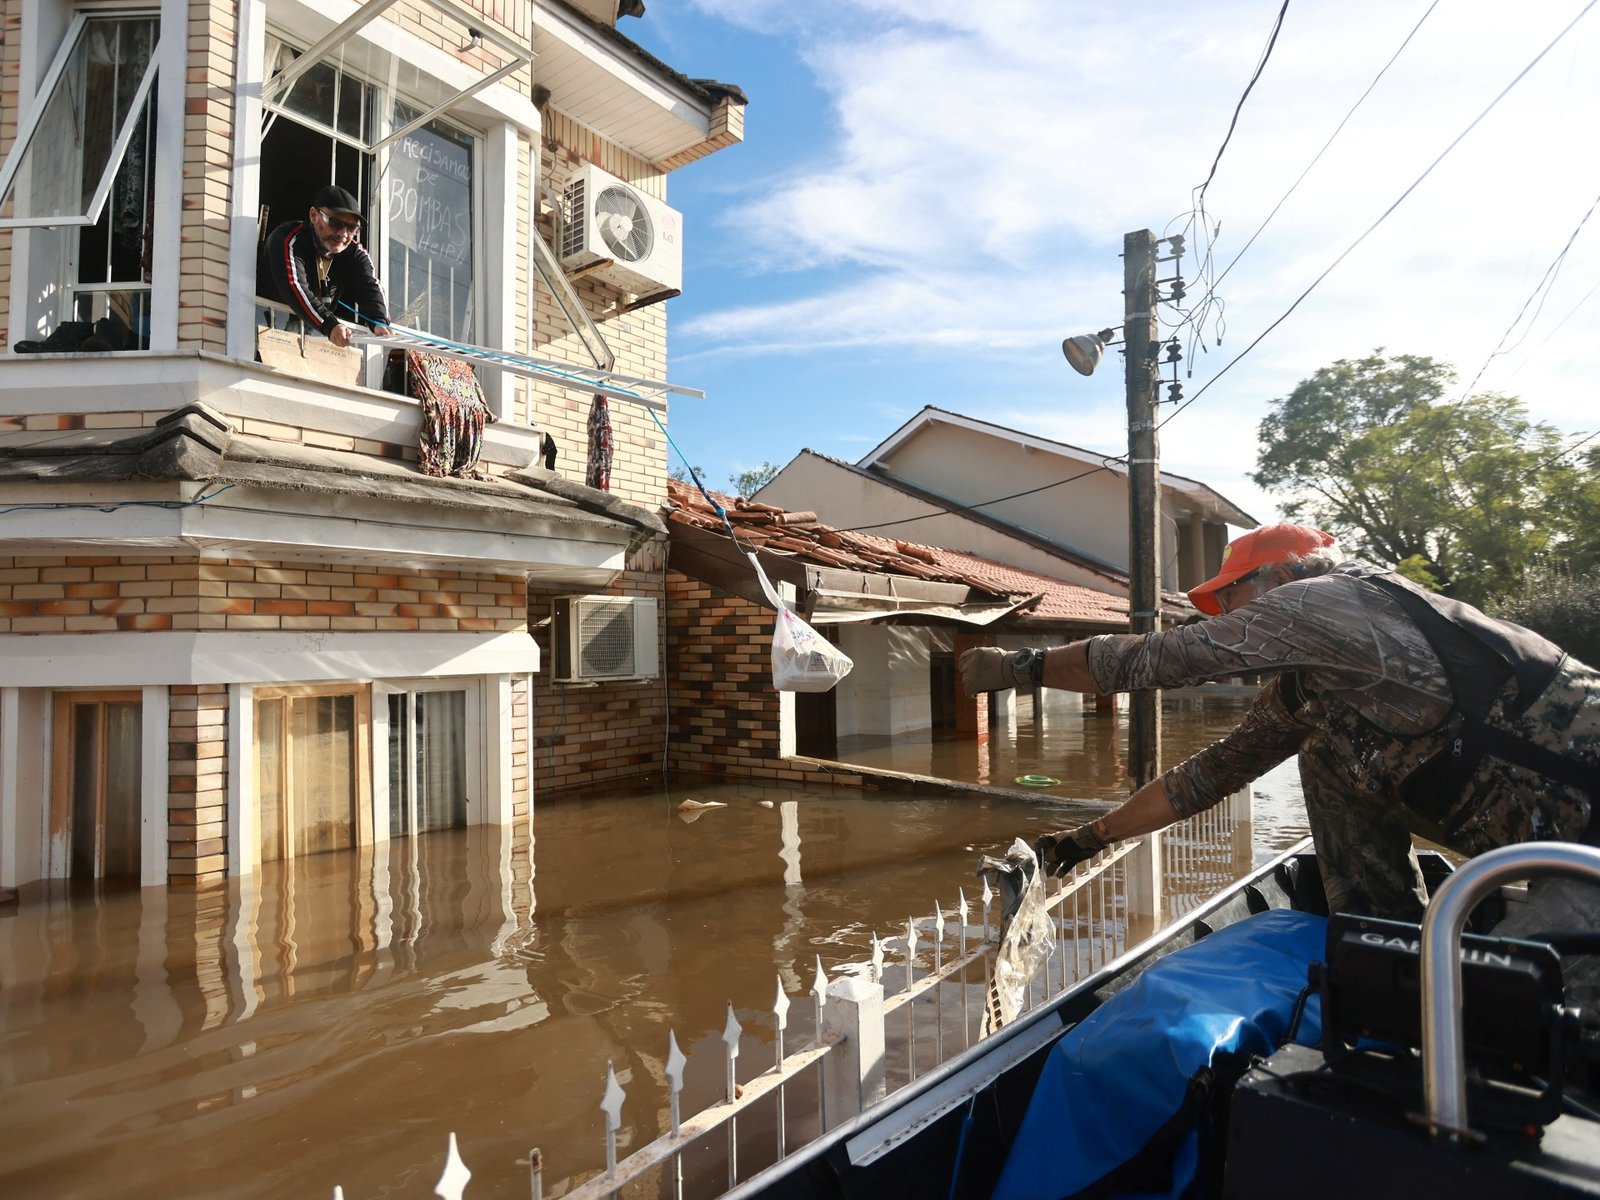 As Brazil copes with floods, officials face another scourge: Disinformation | Floods News